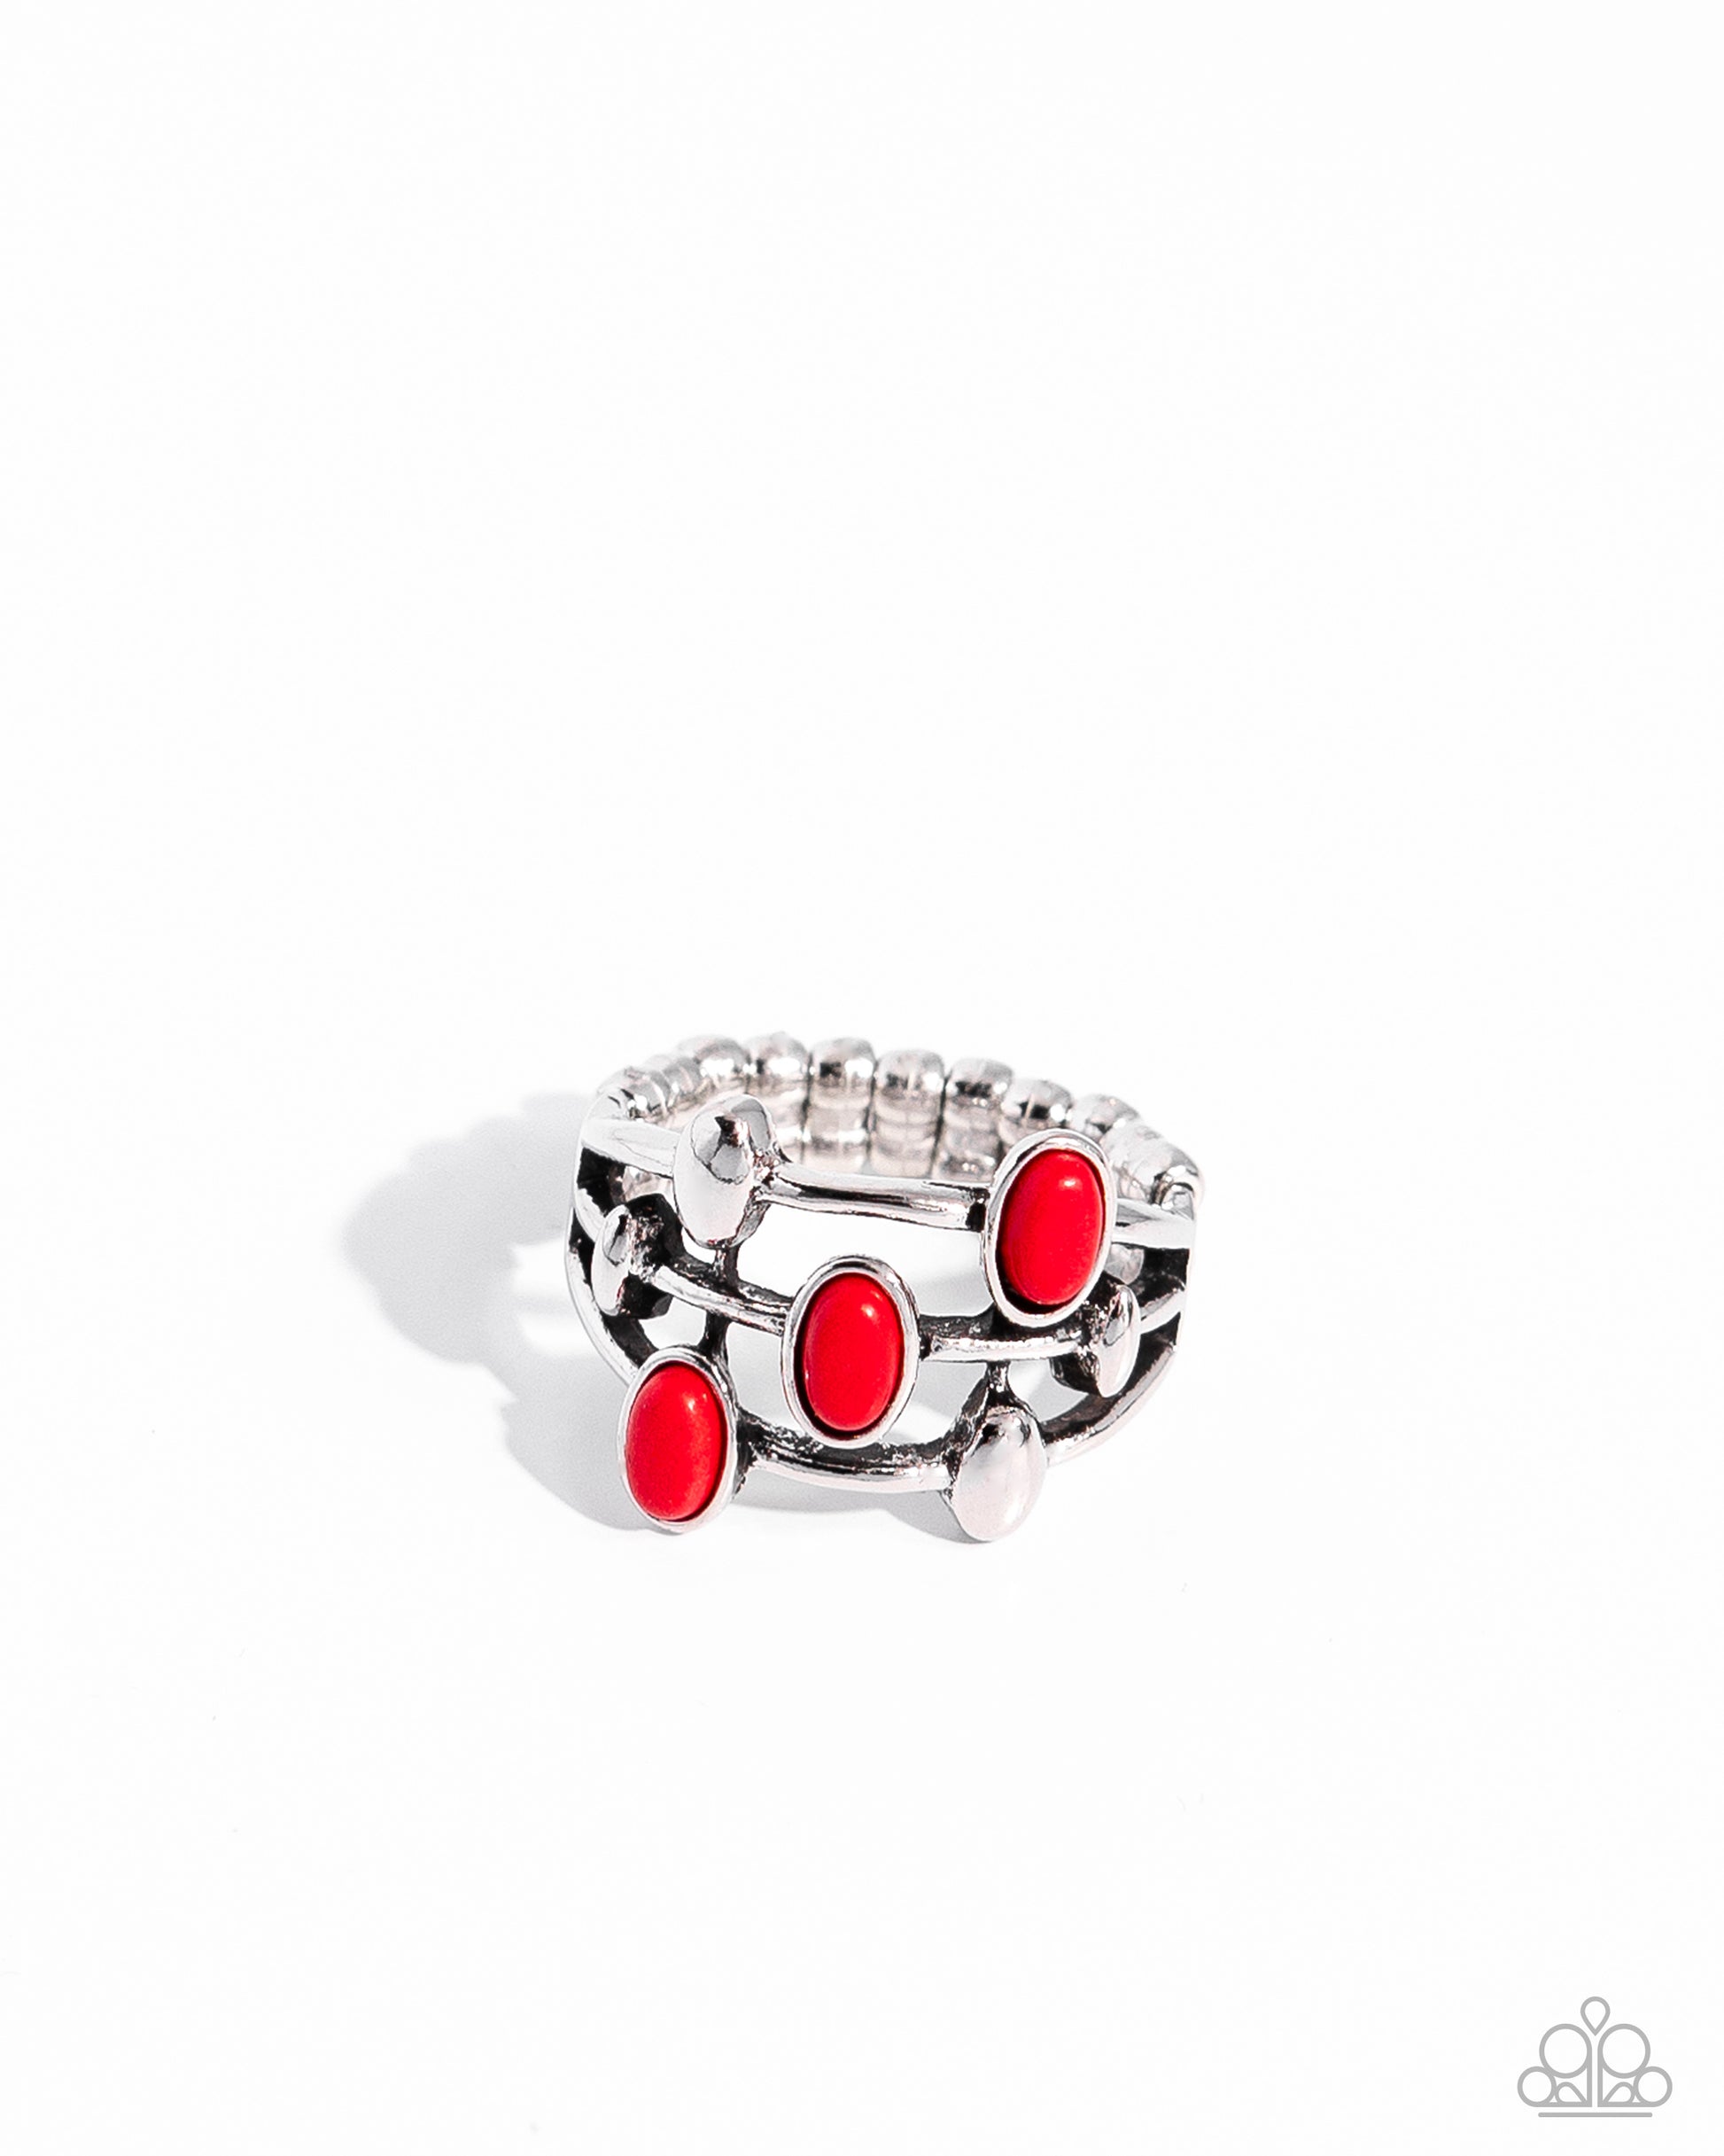 In The Friend STONE - red - Paparazzi ring